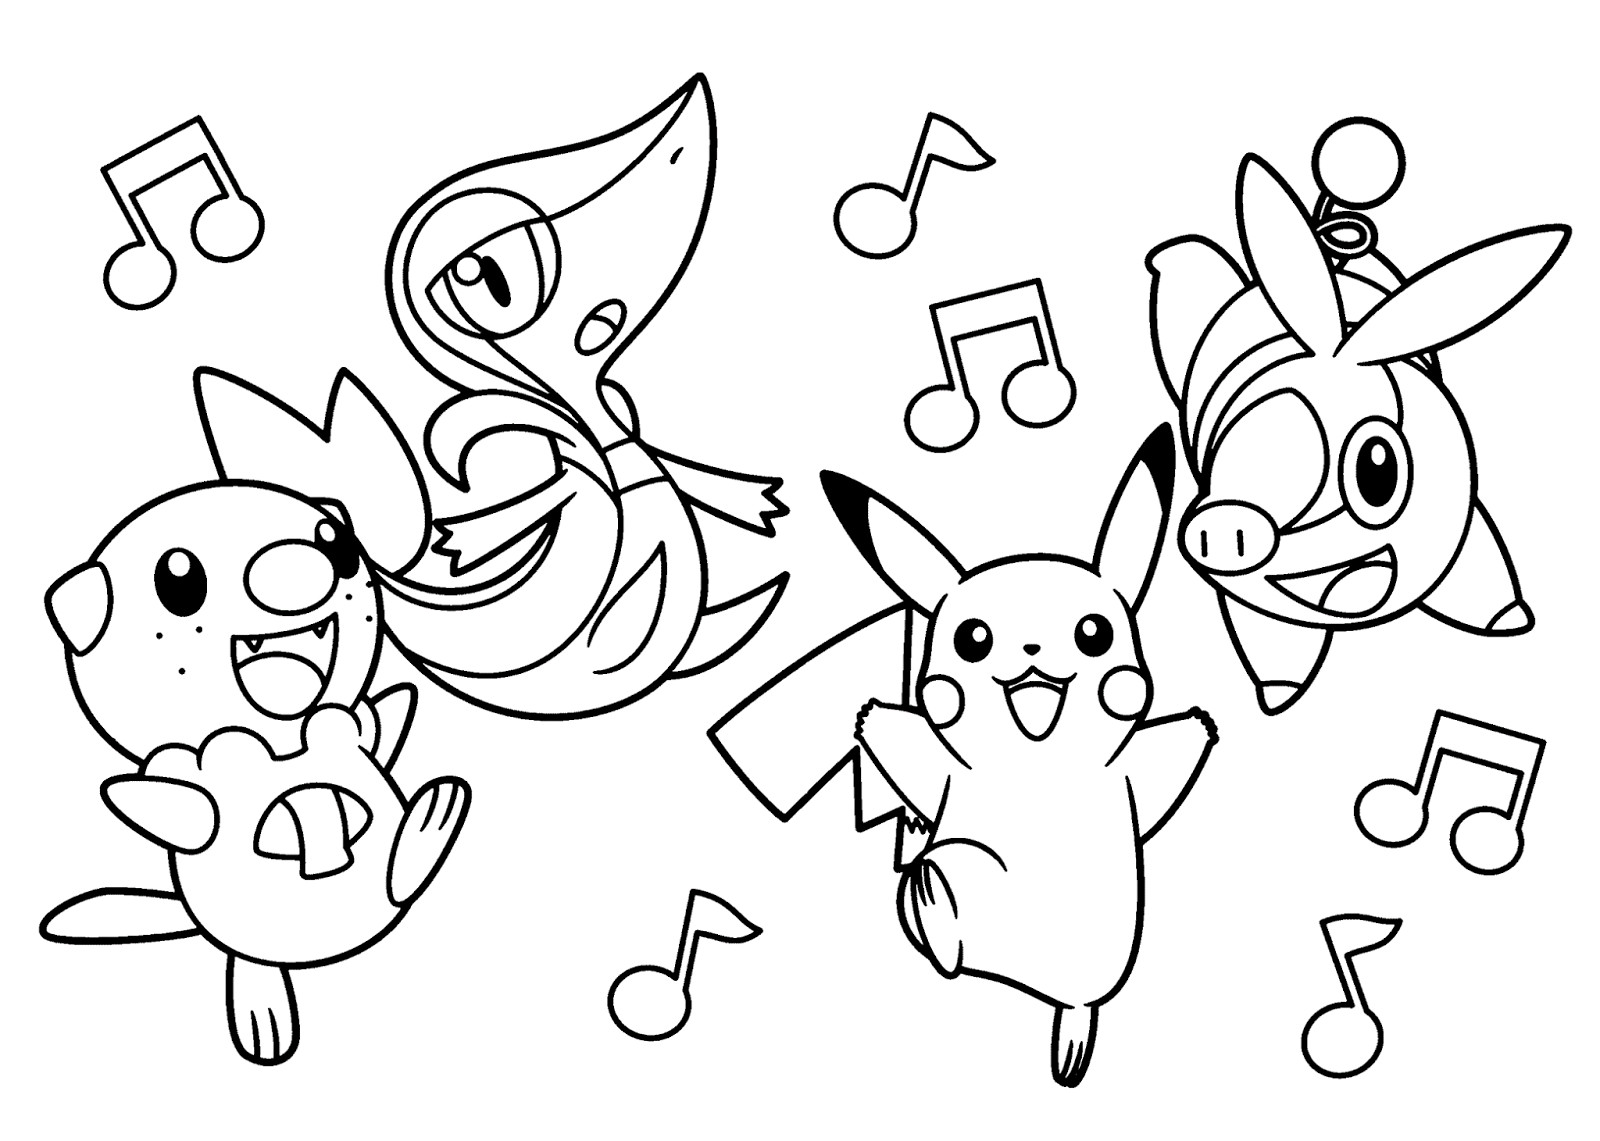 Printable Pokemon Coloring Pages
 Free Pokemon Coloring Pages For Kids 2016